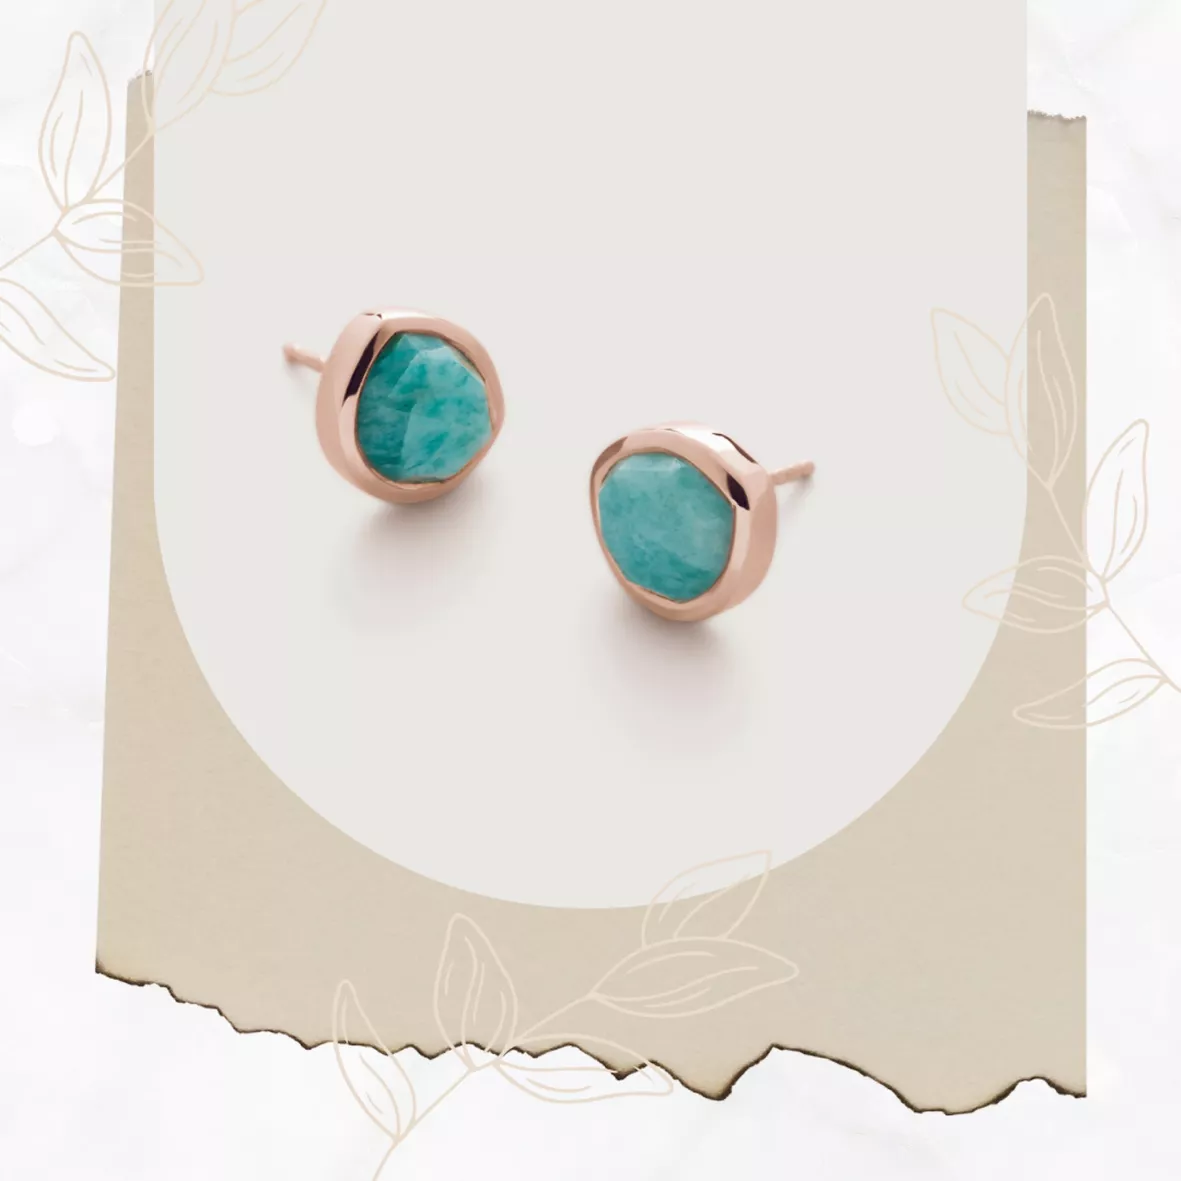 Turquoise: A Spring Staple